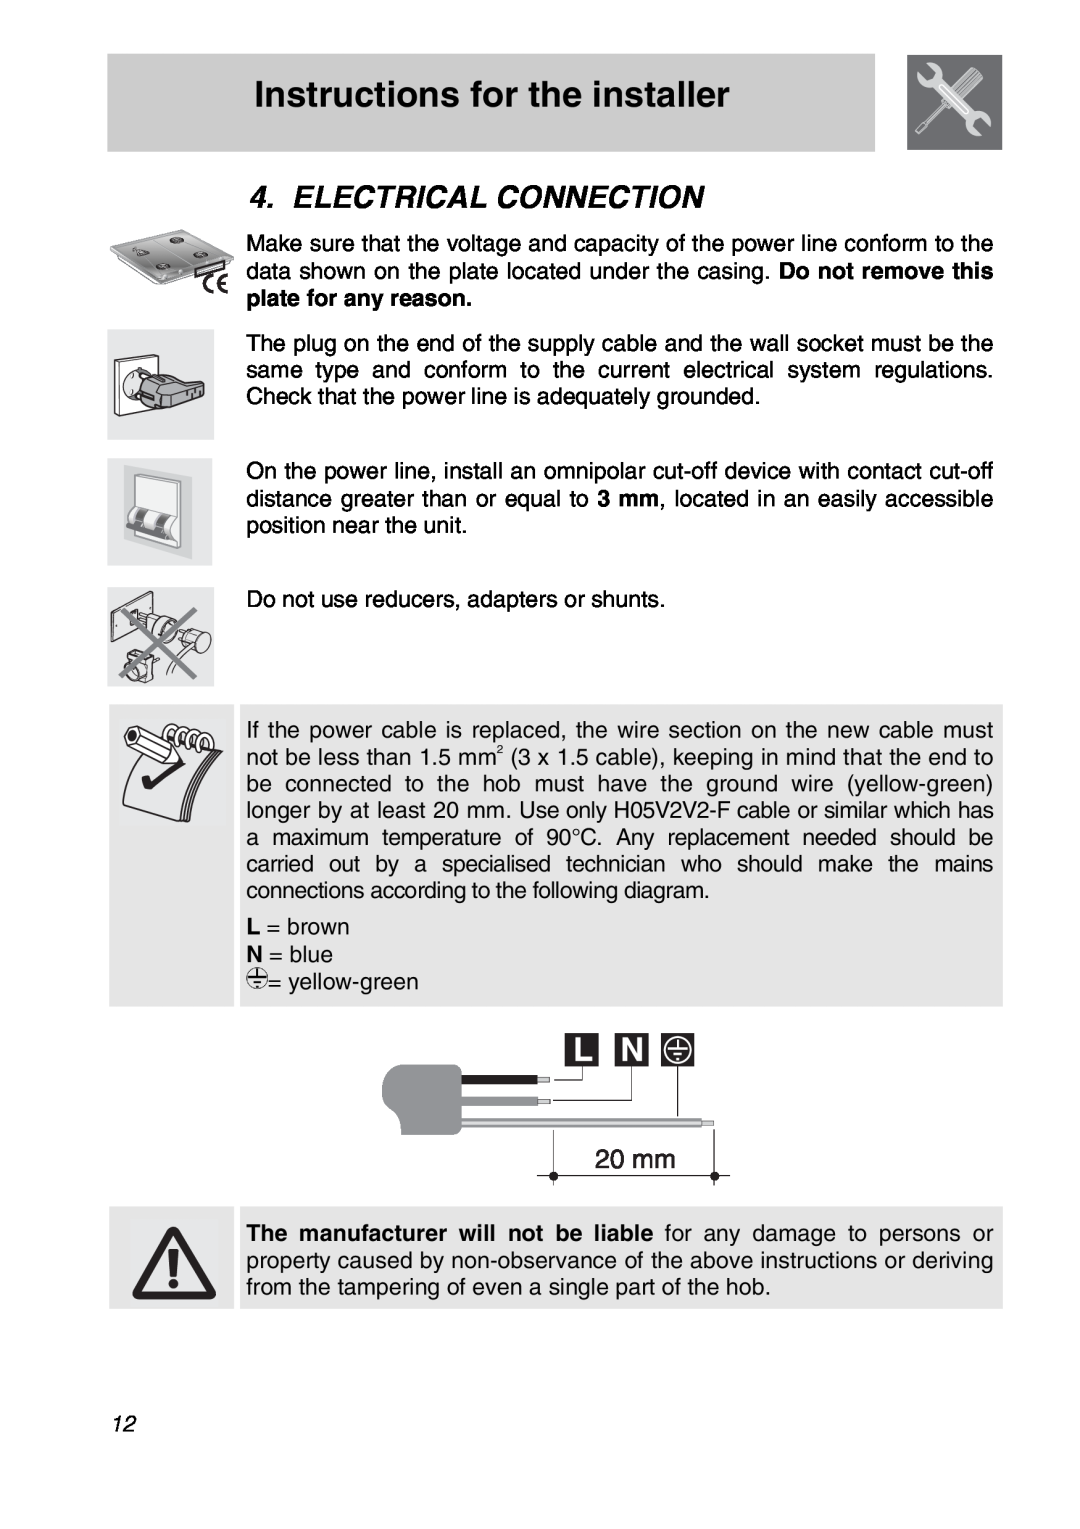 Smeg CIR597X5 manual Electrical Connection, Instructions for the installer 